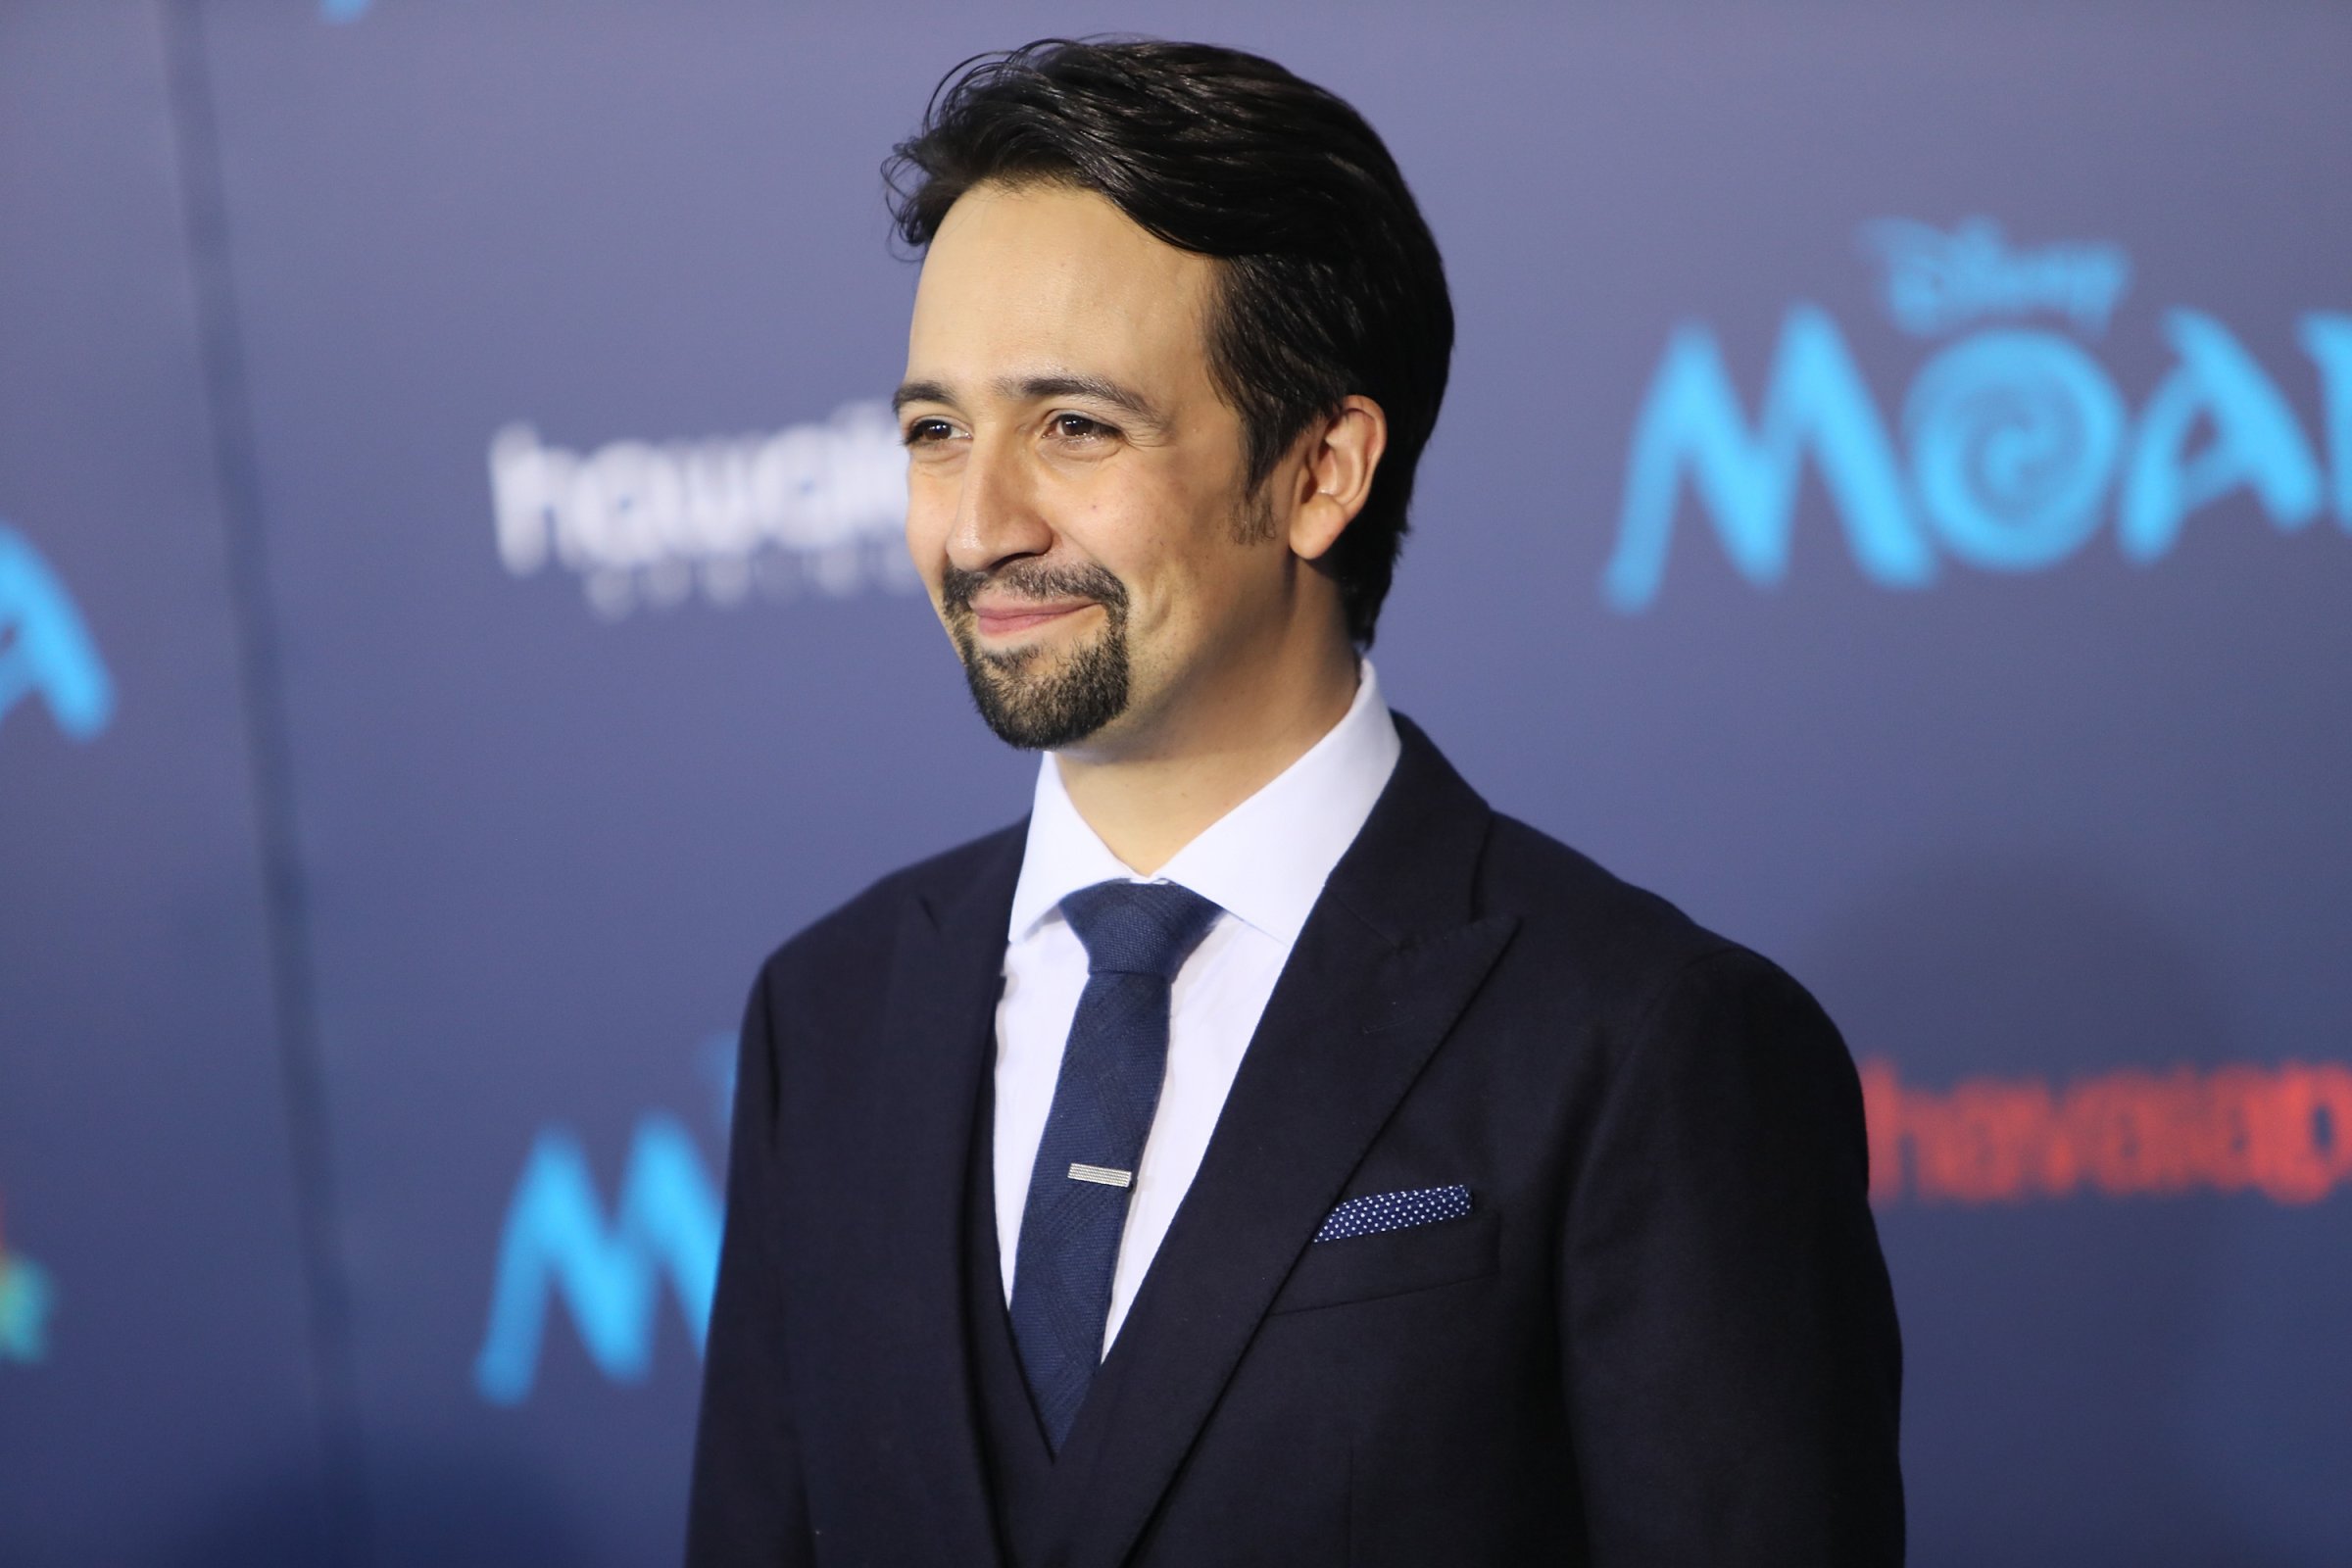 Actor Lin-Manuel Miranda arrives at the AFI FEST 2016 presented by Audi premiere of Disney's "Moana" held at the El Capitan Theatre on November 14, 2016 in Hollywood, California.